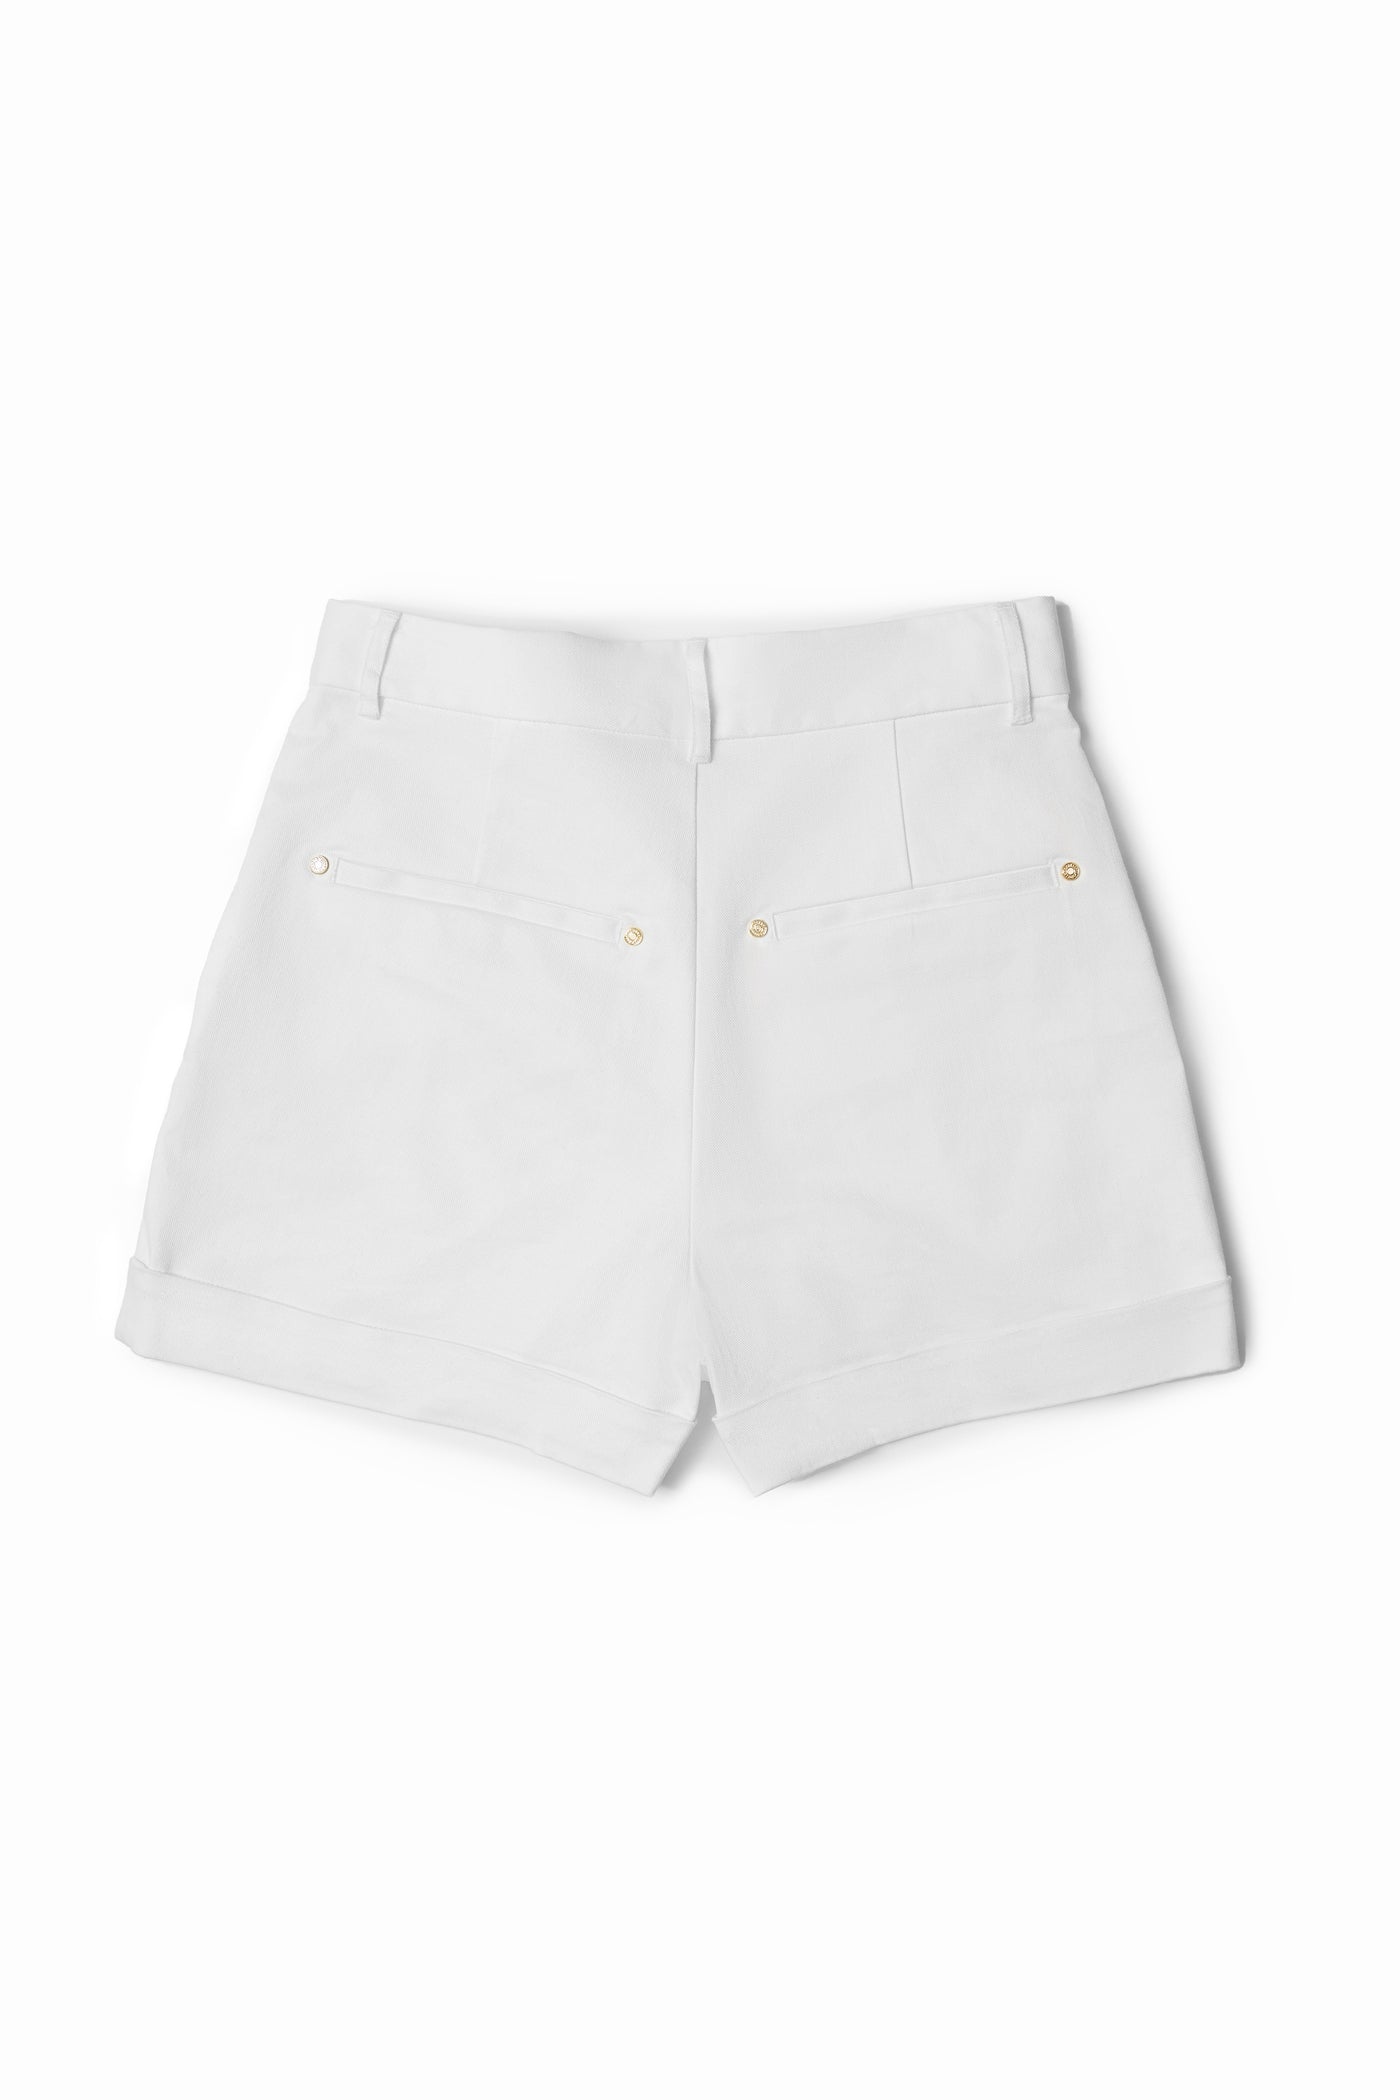 Holland Cooper Amoria Tailored Short in White